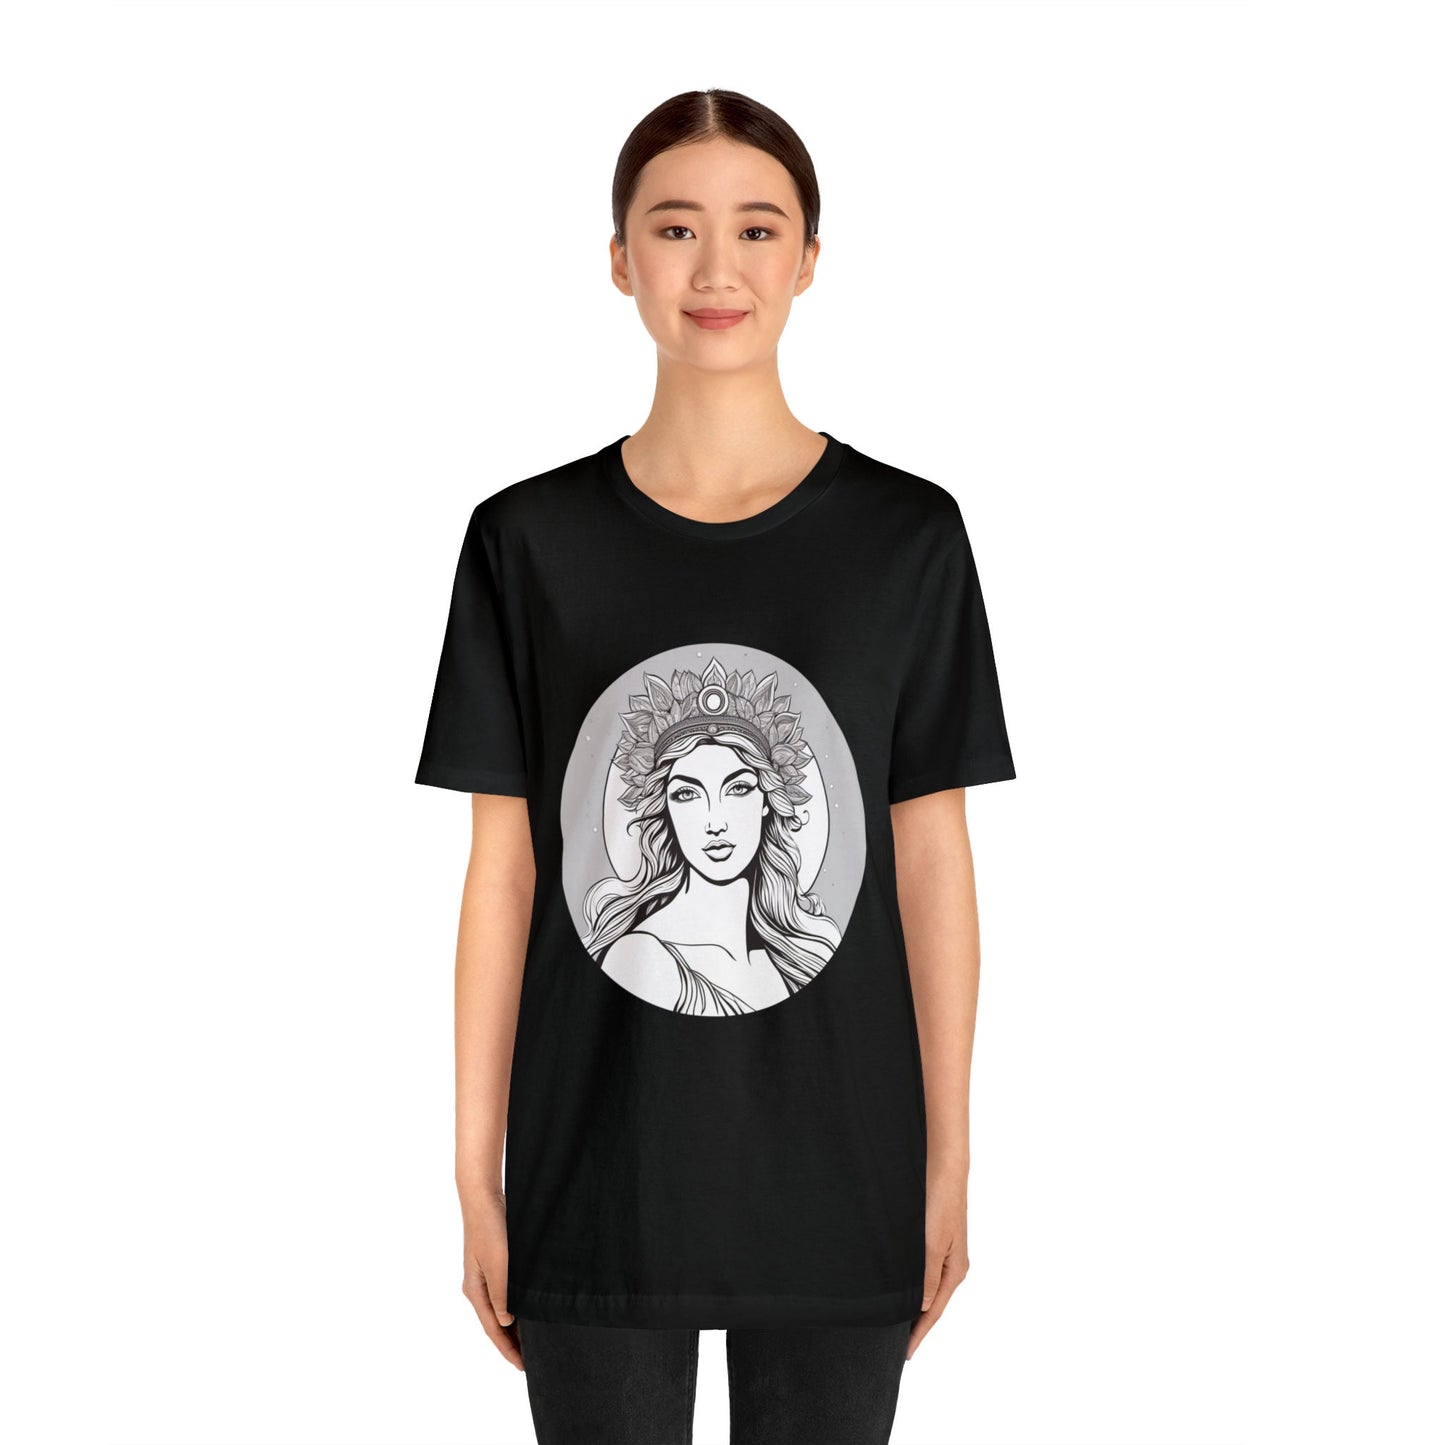 Aphrodite Tattoo Pin-Up Girl Short Sleeve Tee Perfect Gift for Men and Women